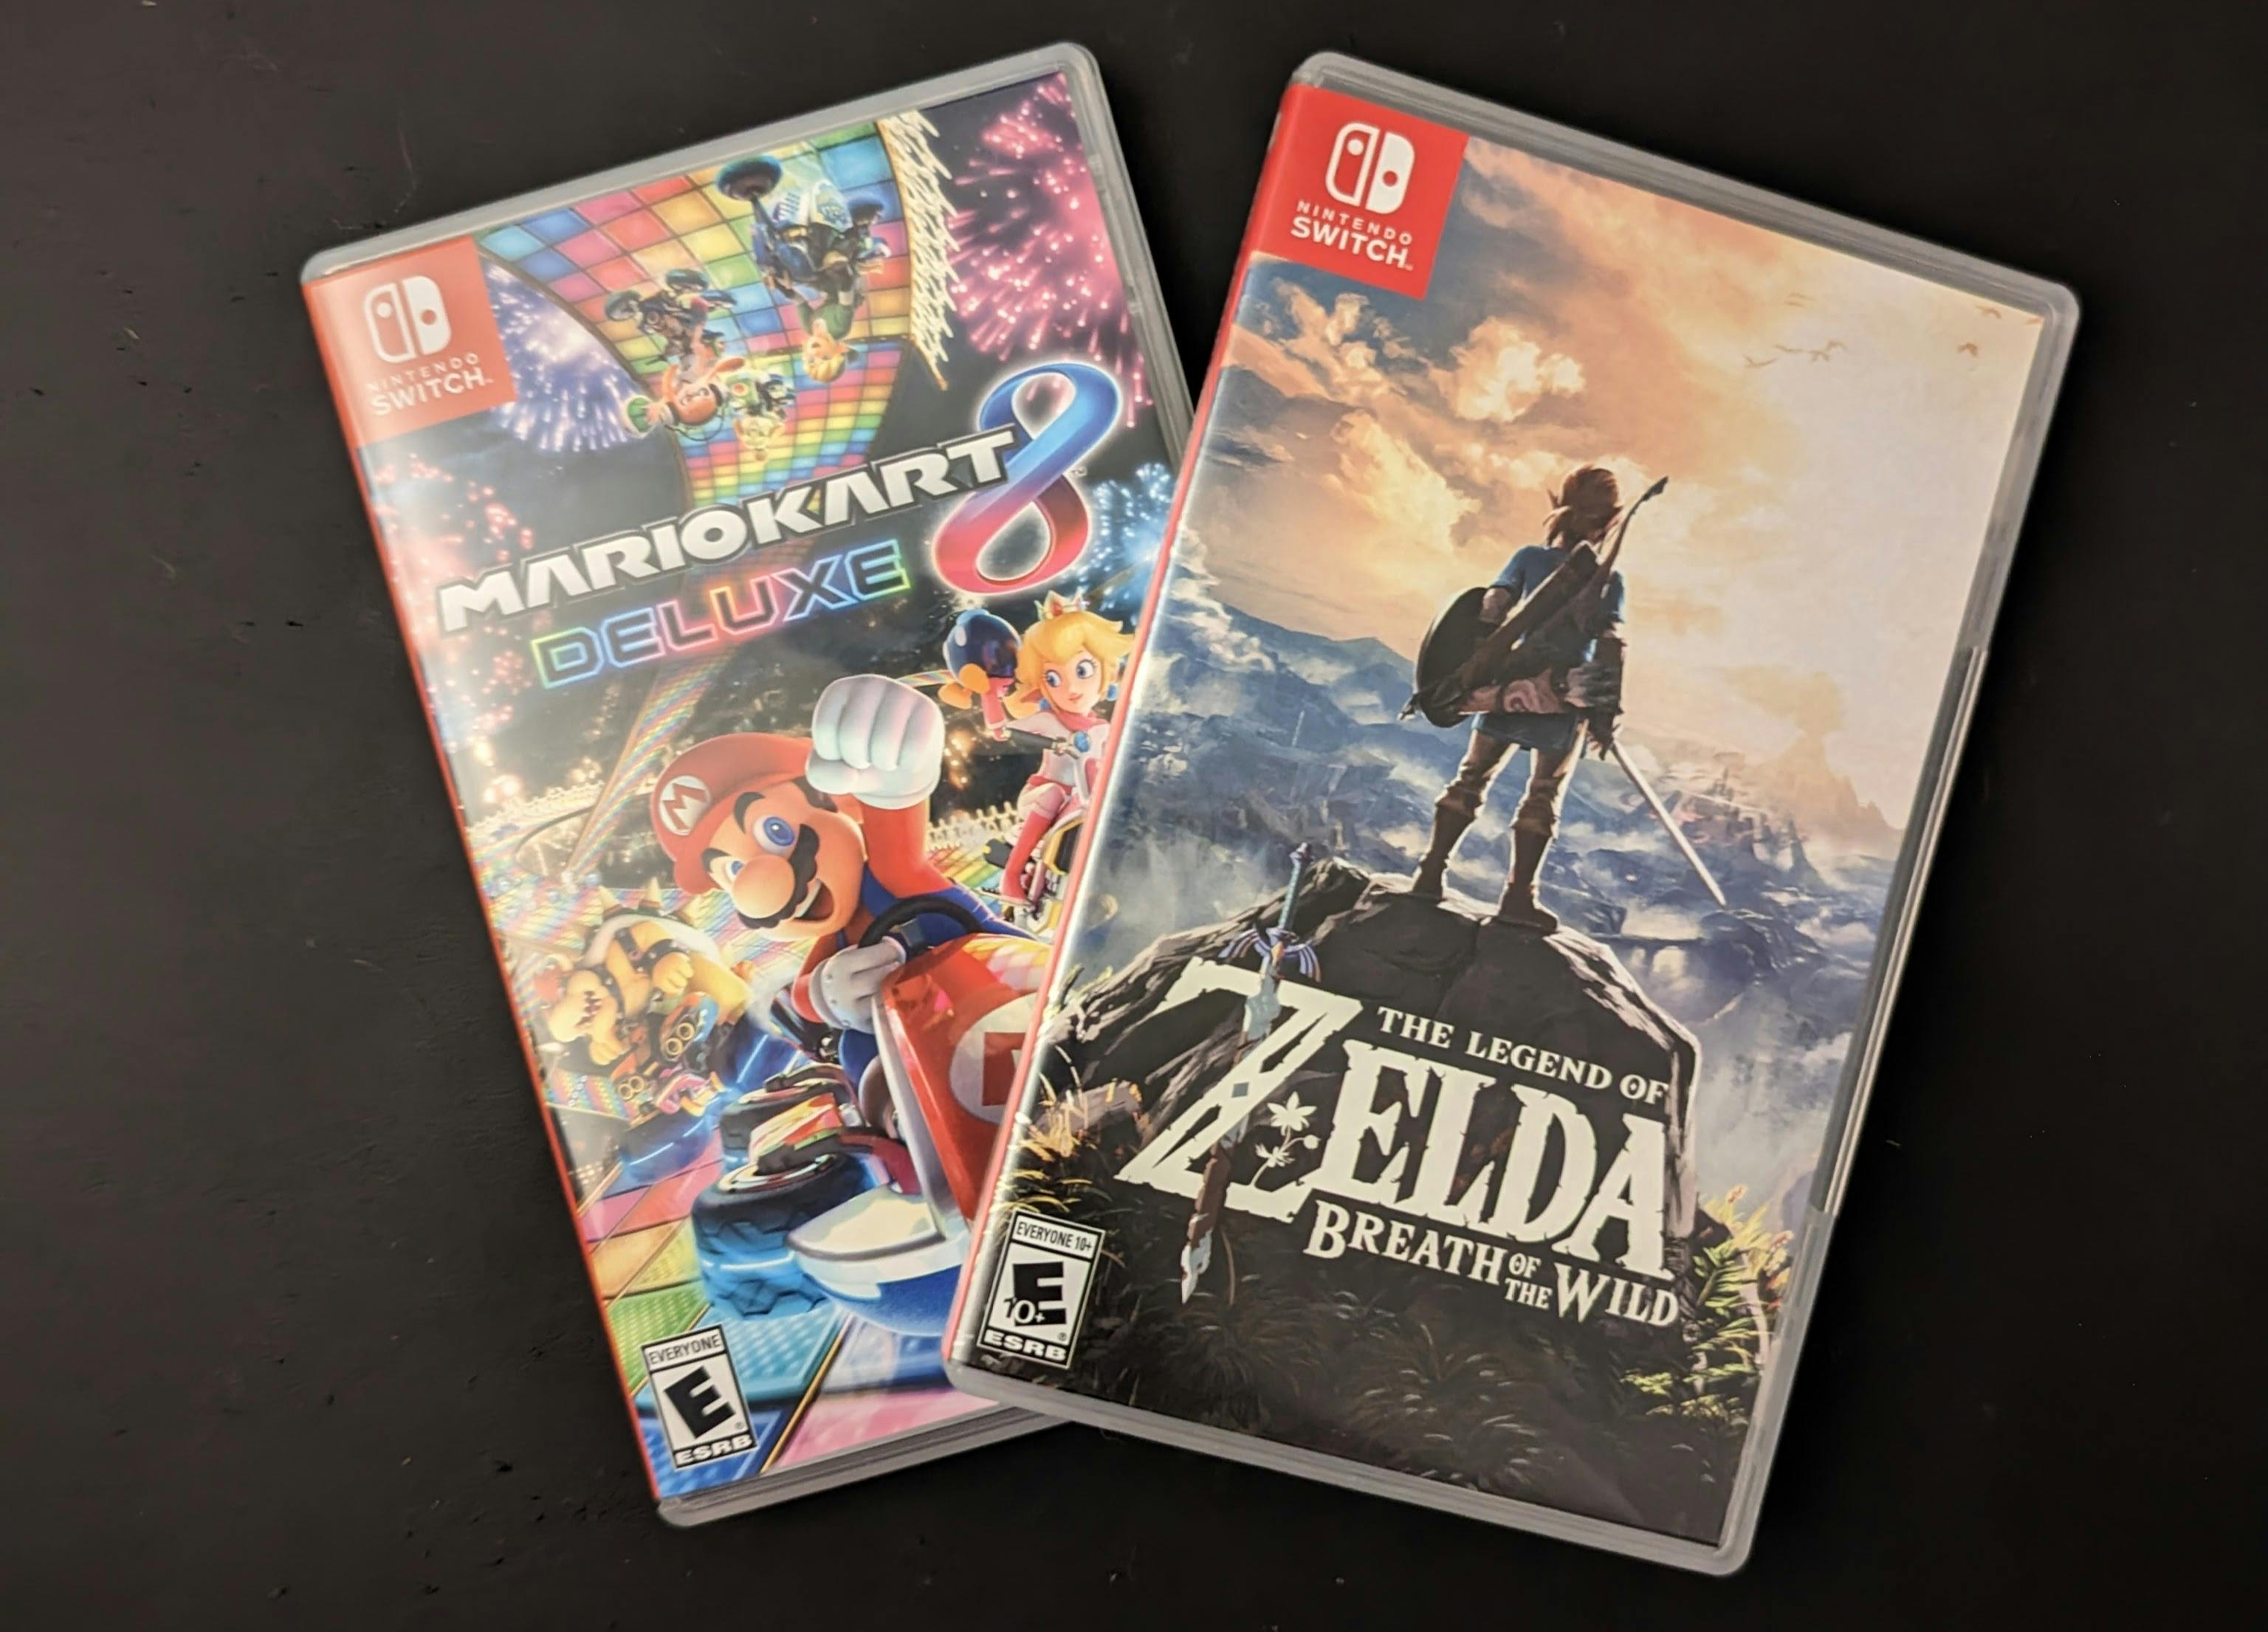 Couple of (great) Switch games I truly own